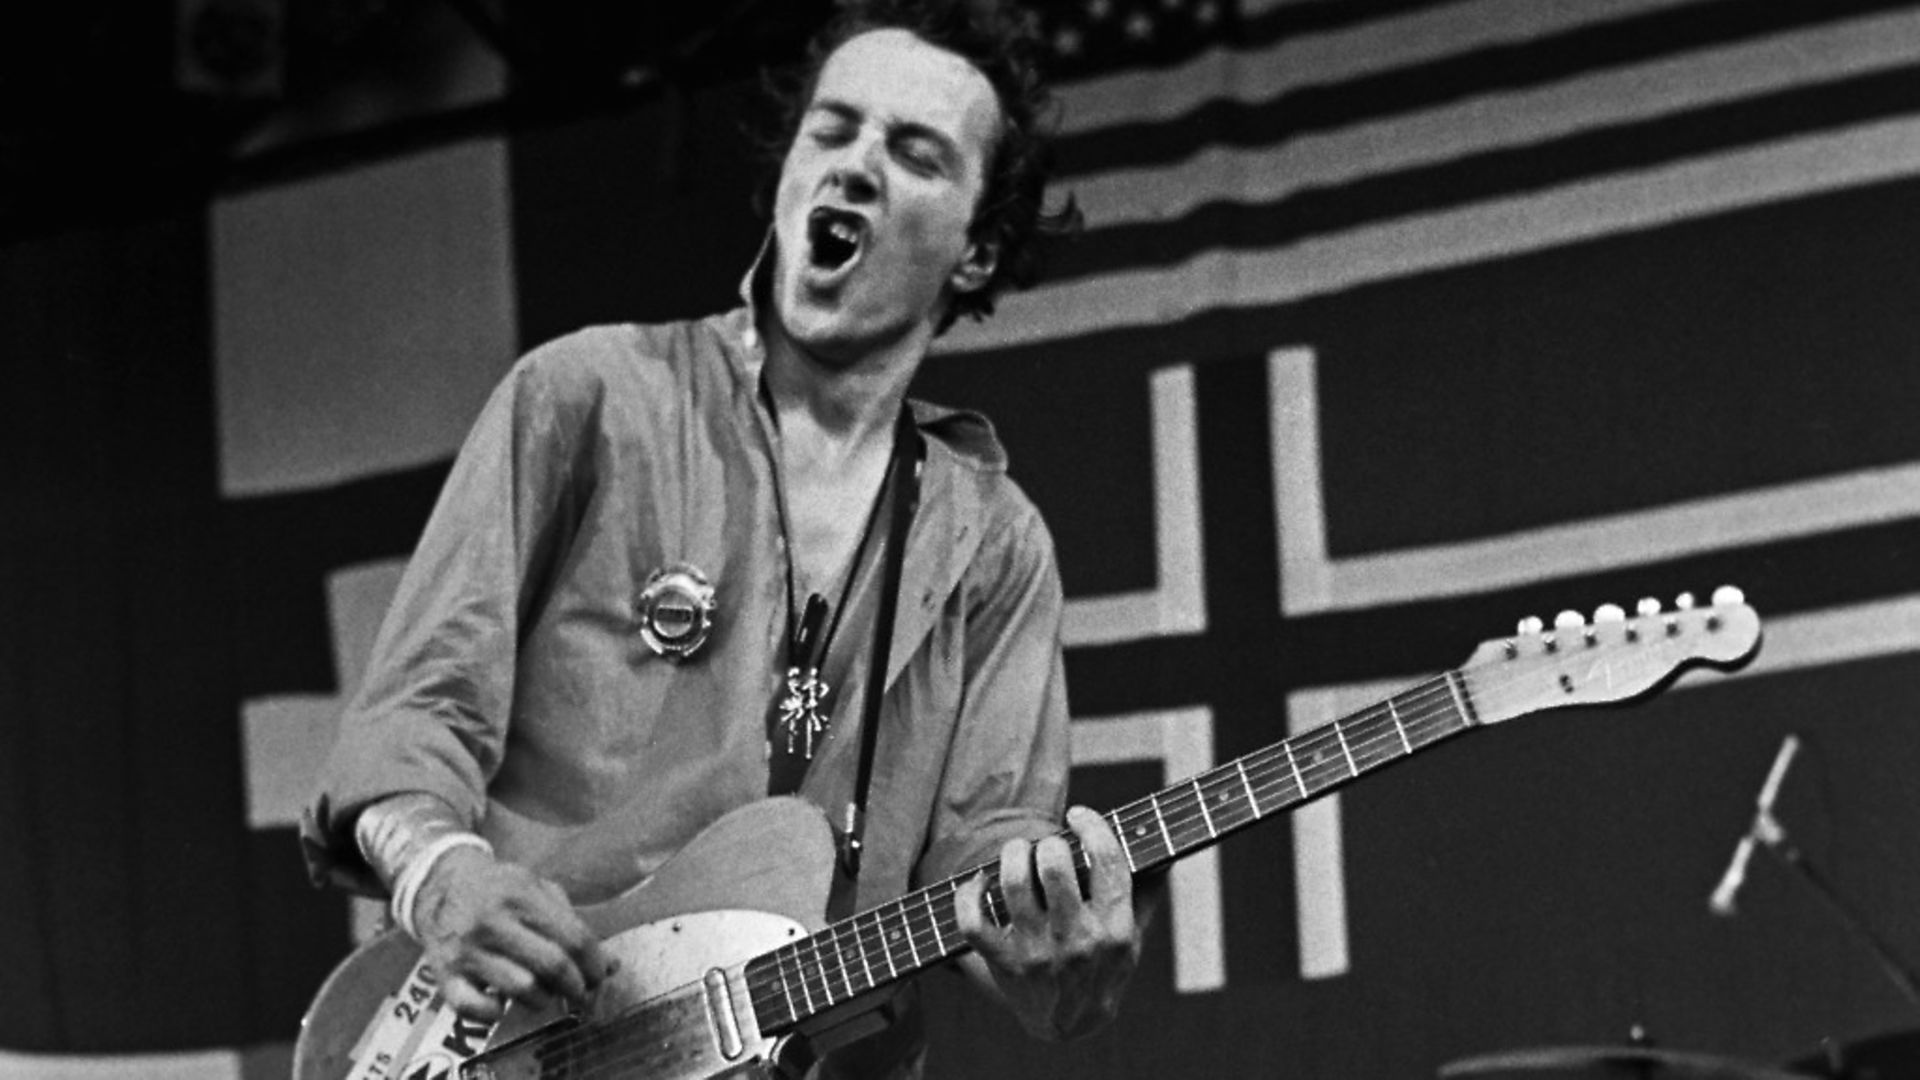 MONTEREY, CA - 1979:  Joe Strummer, of the British punk rock band "The Clash," performs onstage at a 1979 Monterey, California, concert dubbed "Monterey Pop Festival II." (Photo by George Rose/Getty Images) - Credit: Getty Images